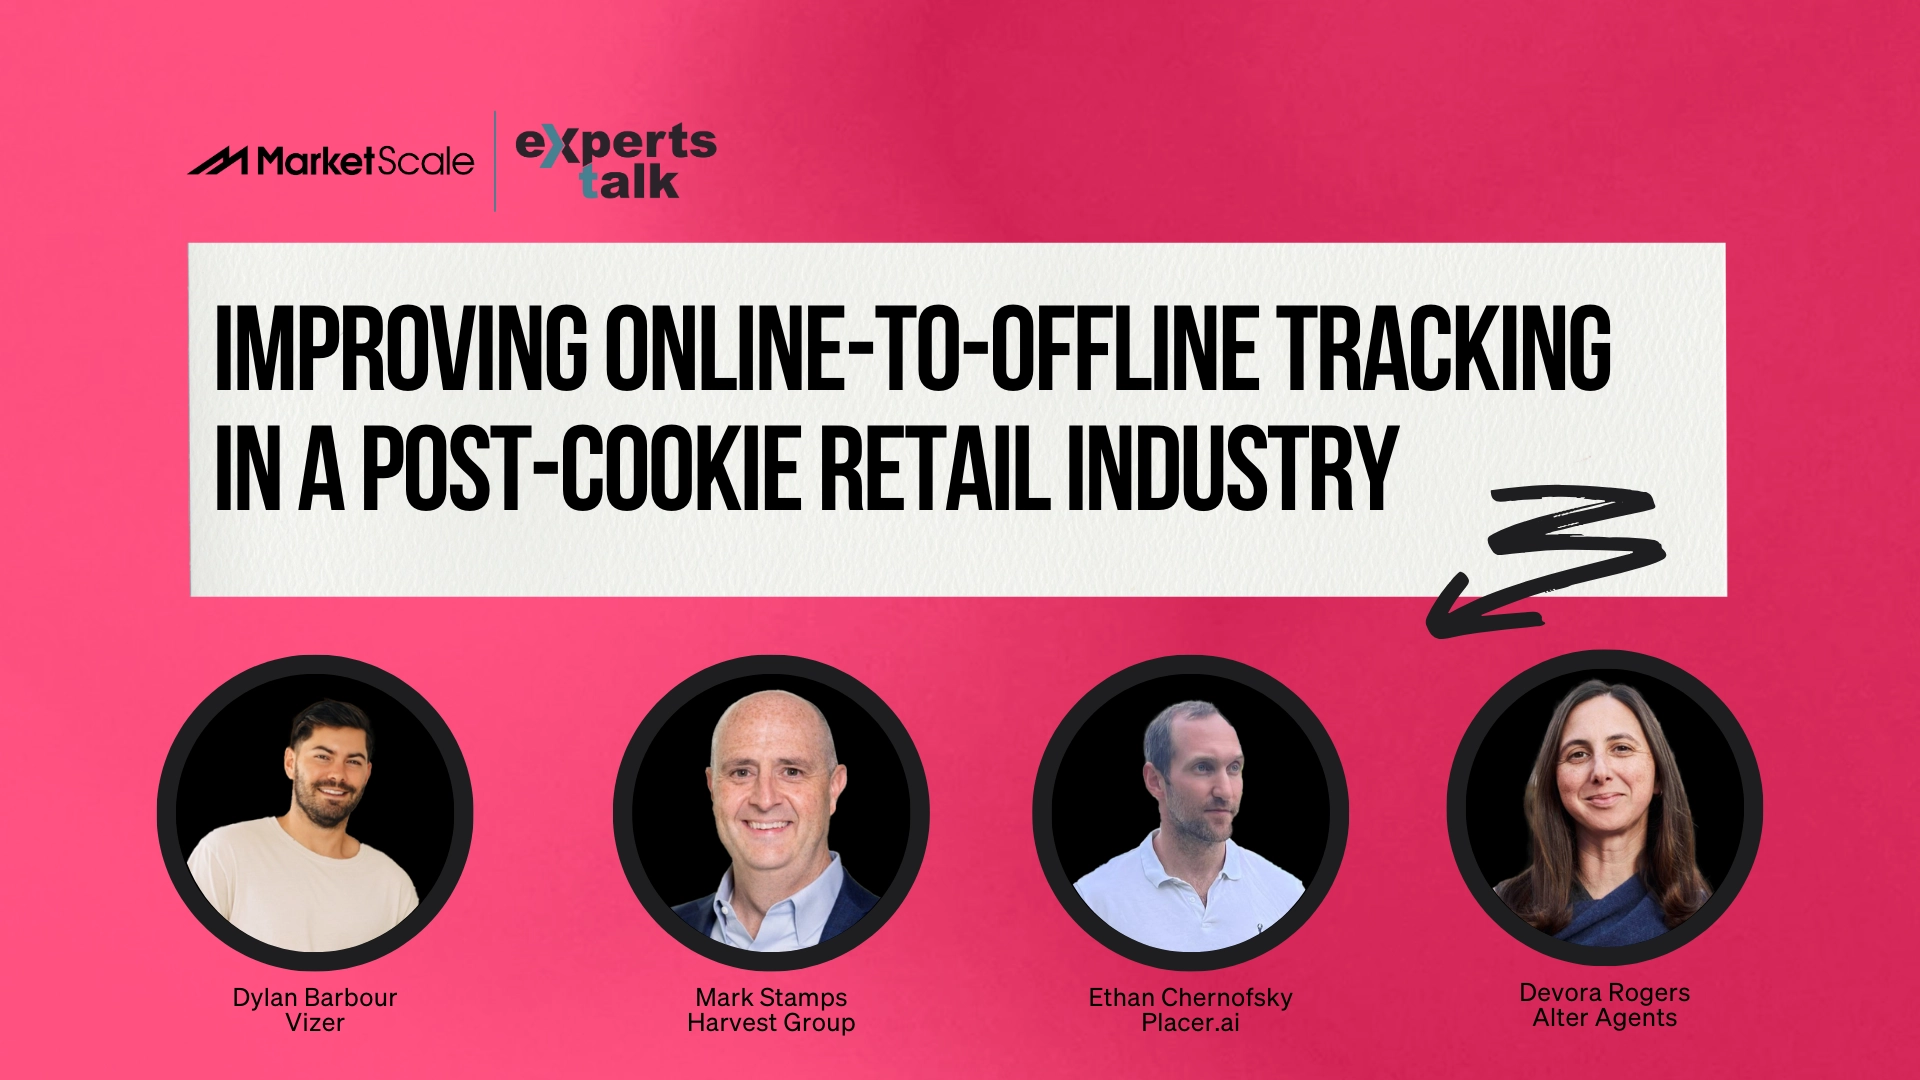 Bridging Online Shopping with Brick-and-Mortar: The Importance of Improving Online-to-Offline Tracking in a Post-Cookie Retail Industry